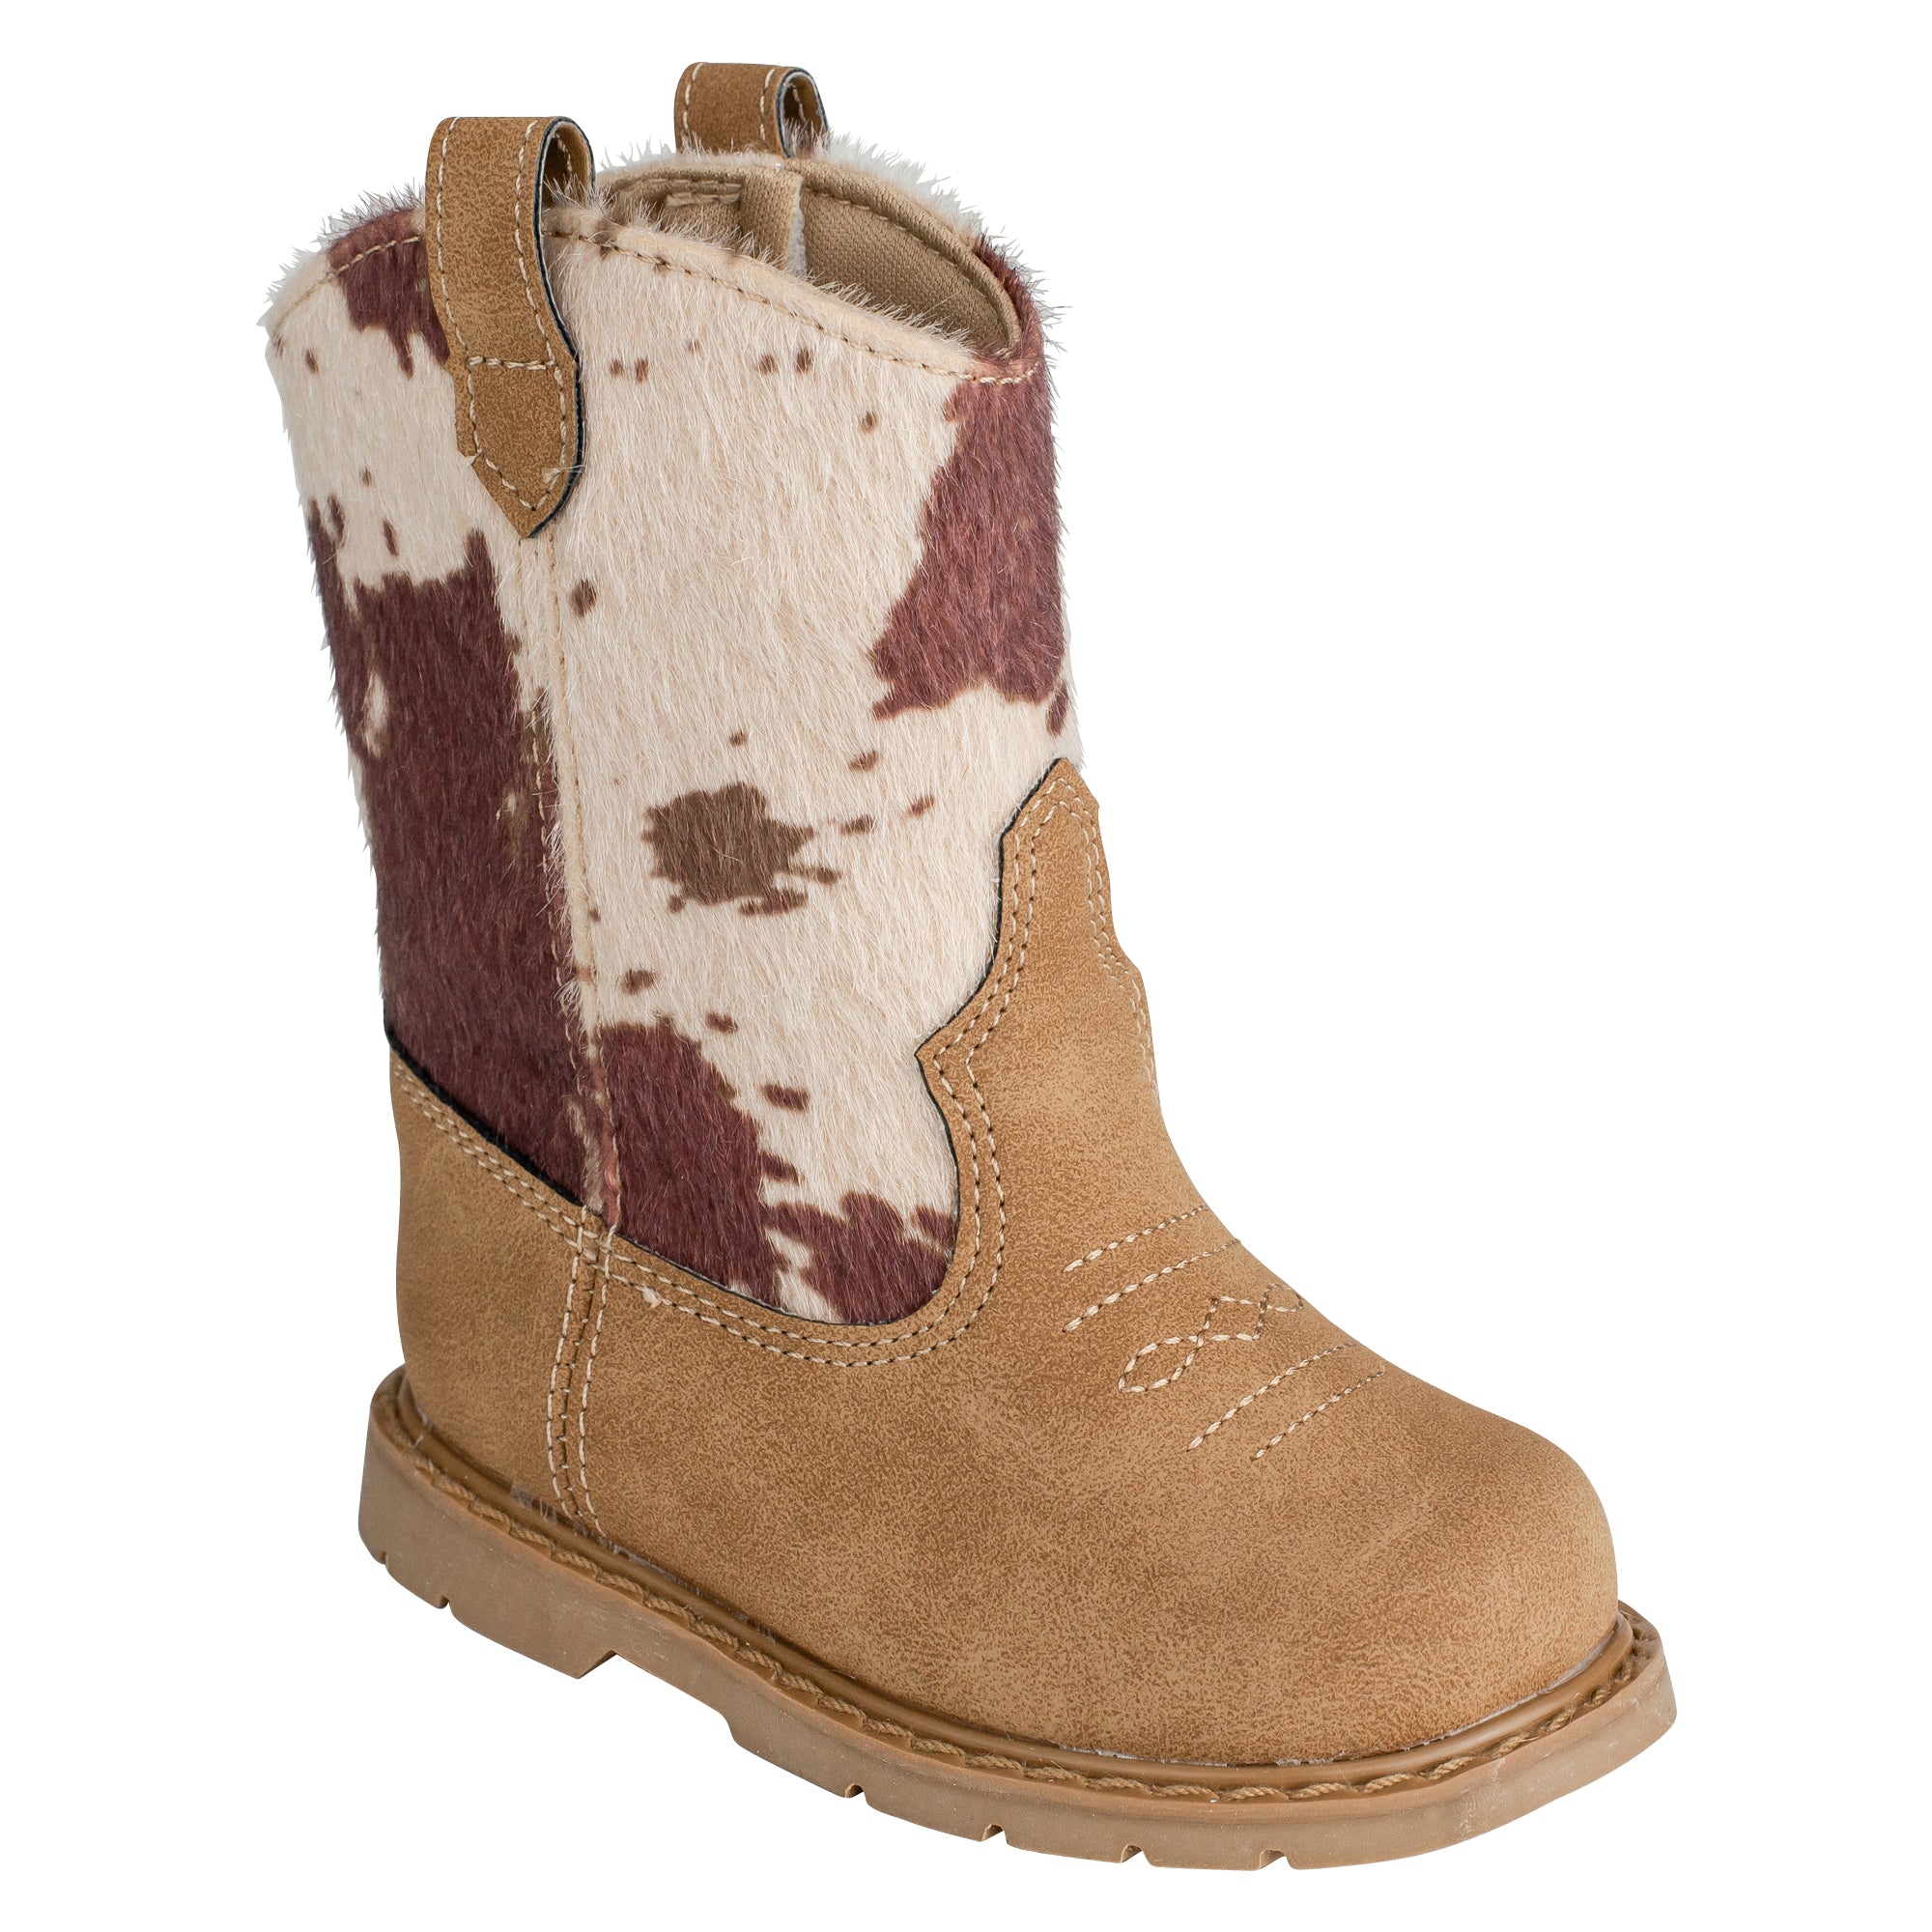 rounded toe brown cowboy boots with cowhide on the sides